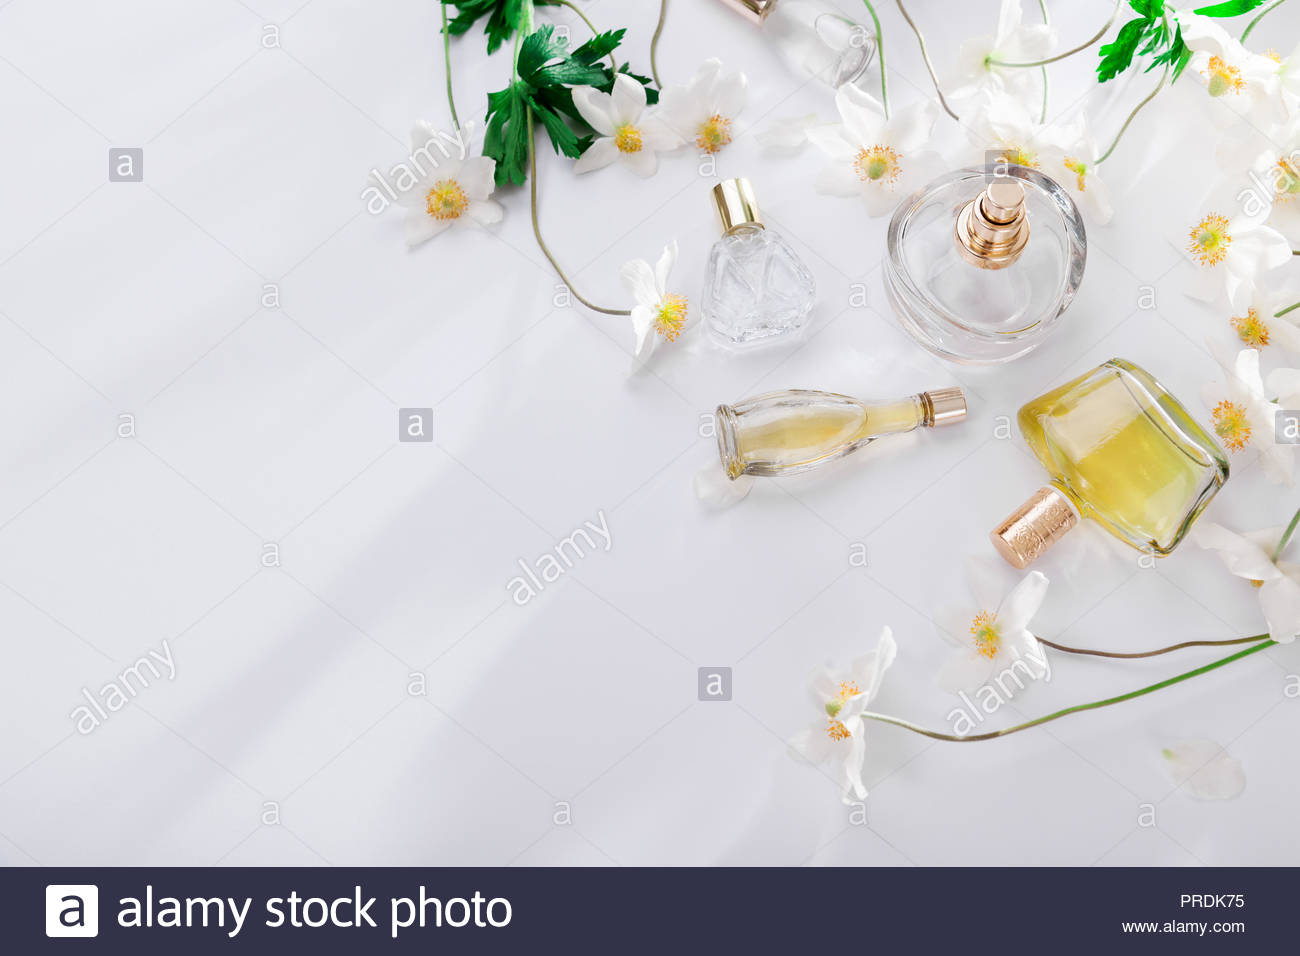 Natural Perfume Concept Bottles Of With White Flowers On